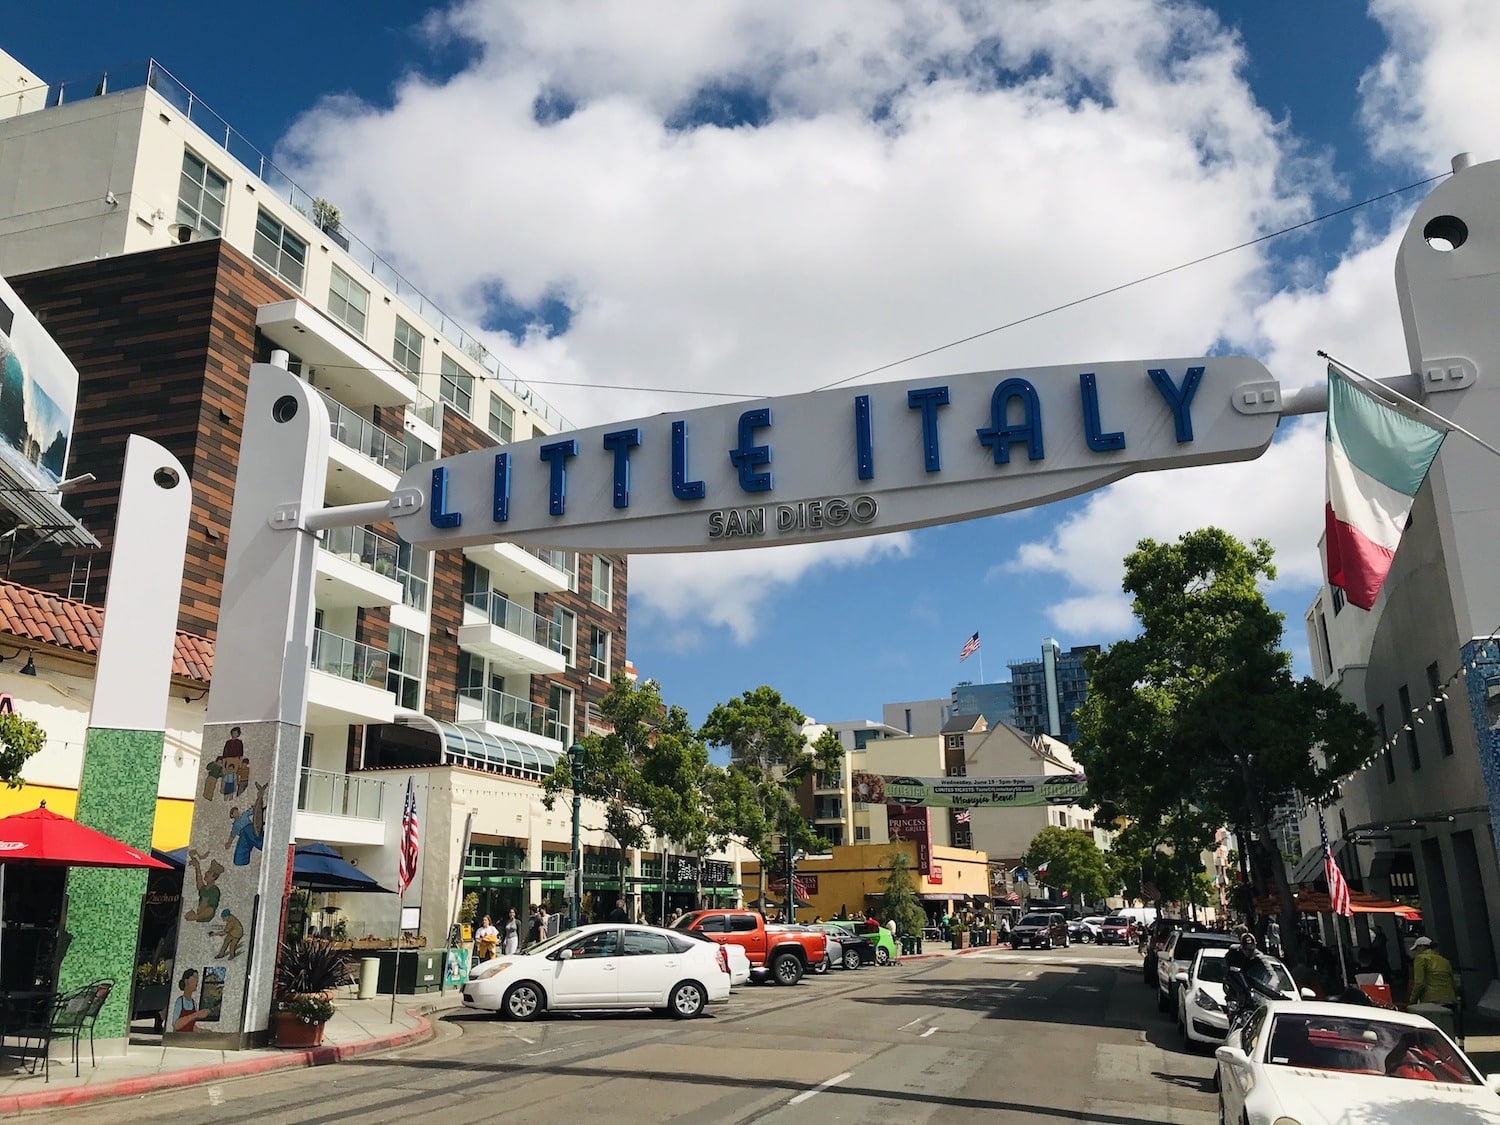 10 Best Restaurants In Little Italy San Diego To Try On Your Next Visit